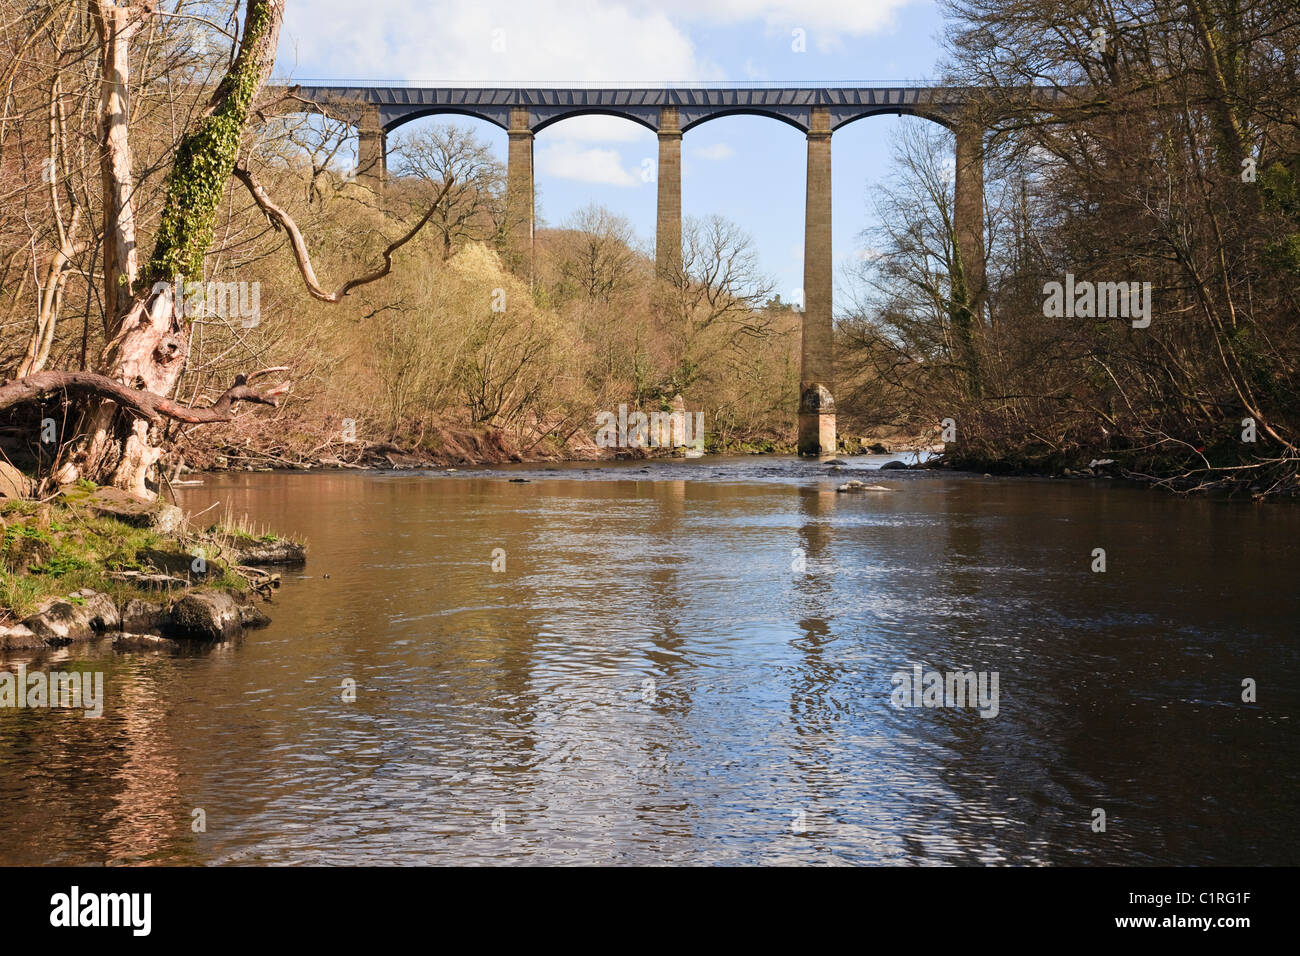 Trevor, Wrexham, North Wales, UK. Pontcysyllte Aqueduct carrying the Llangollen Canal across the River Dee valley. Stock Photo